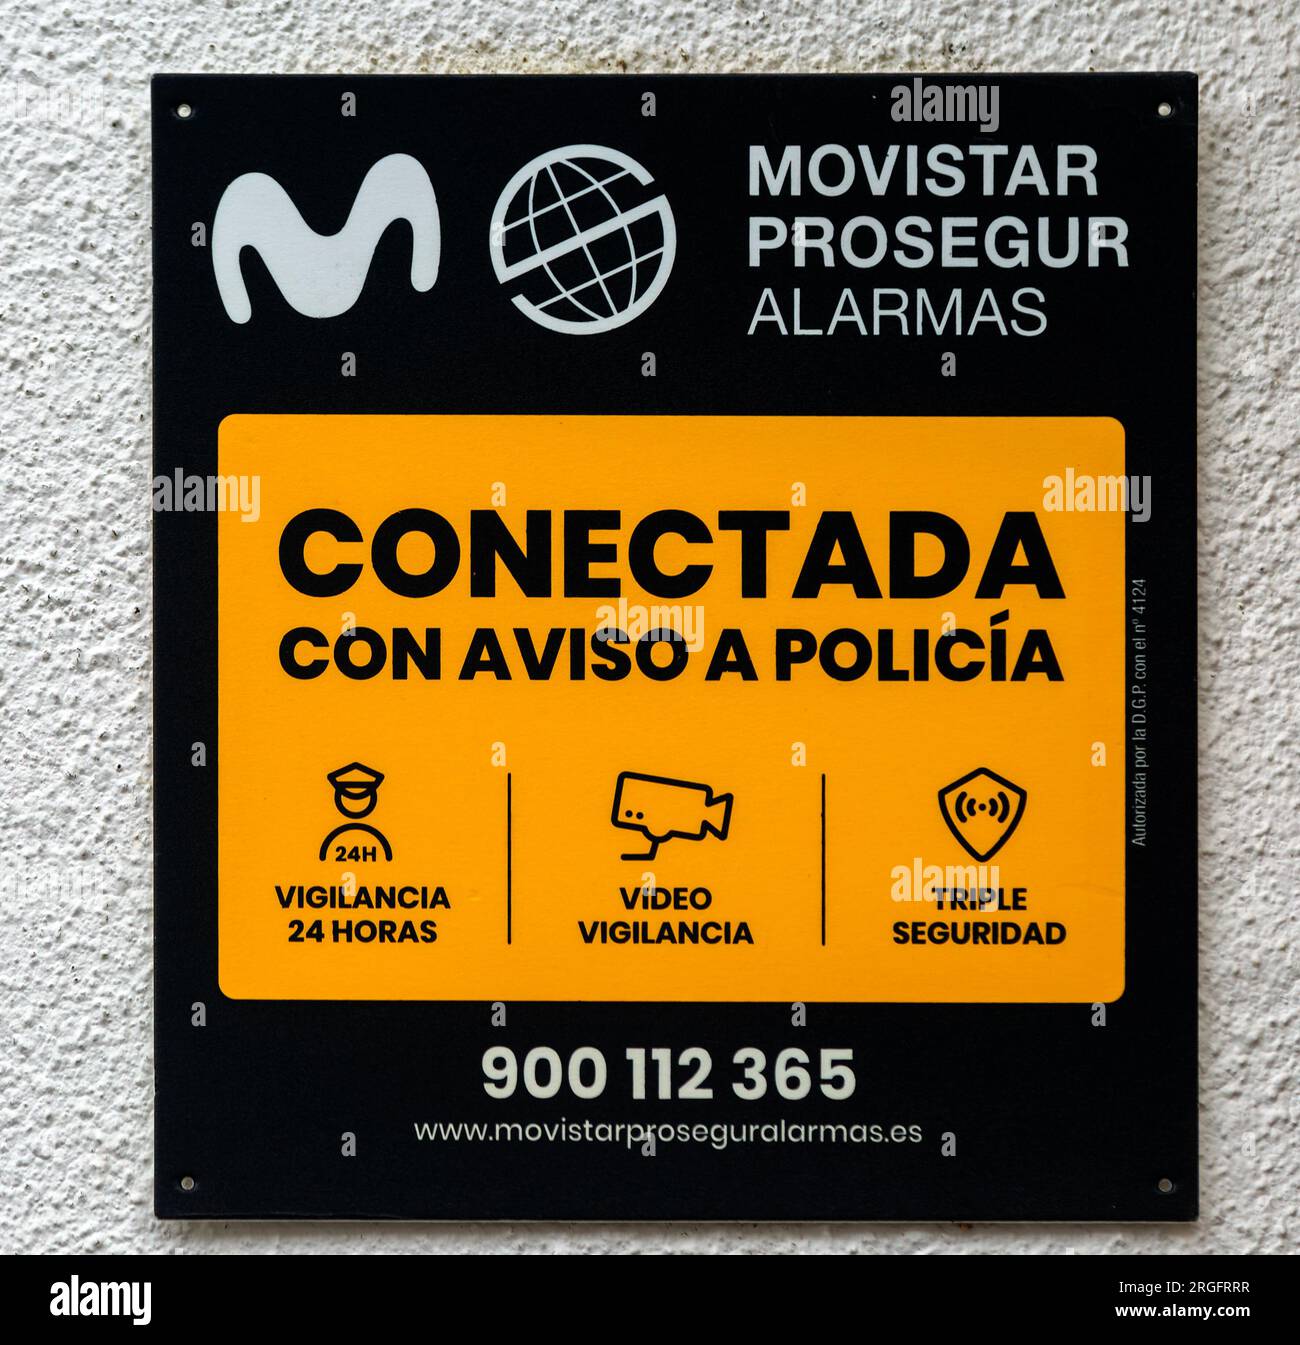 Close up of Movistar Prosegur alarmas domestic security alarms sign linked with police, Galicia, Spain Stock Photo